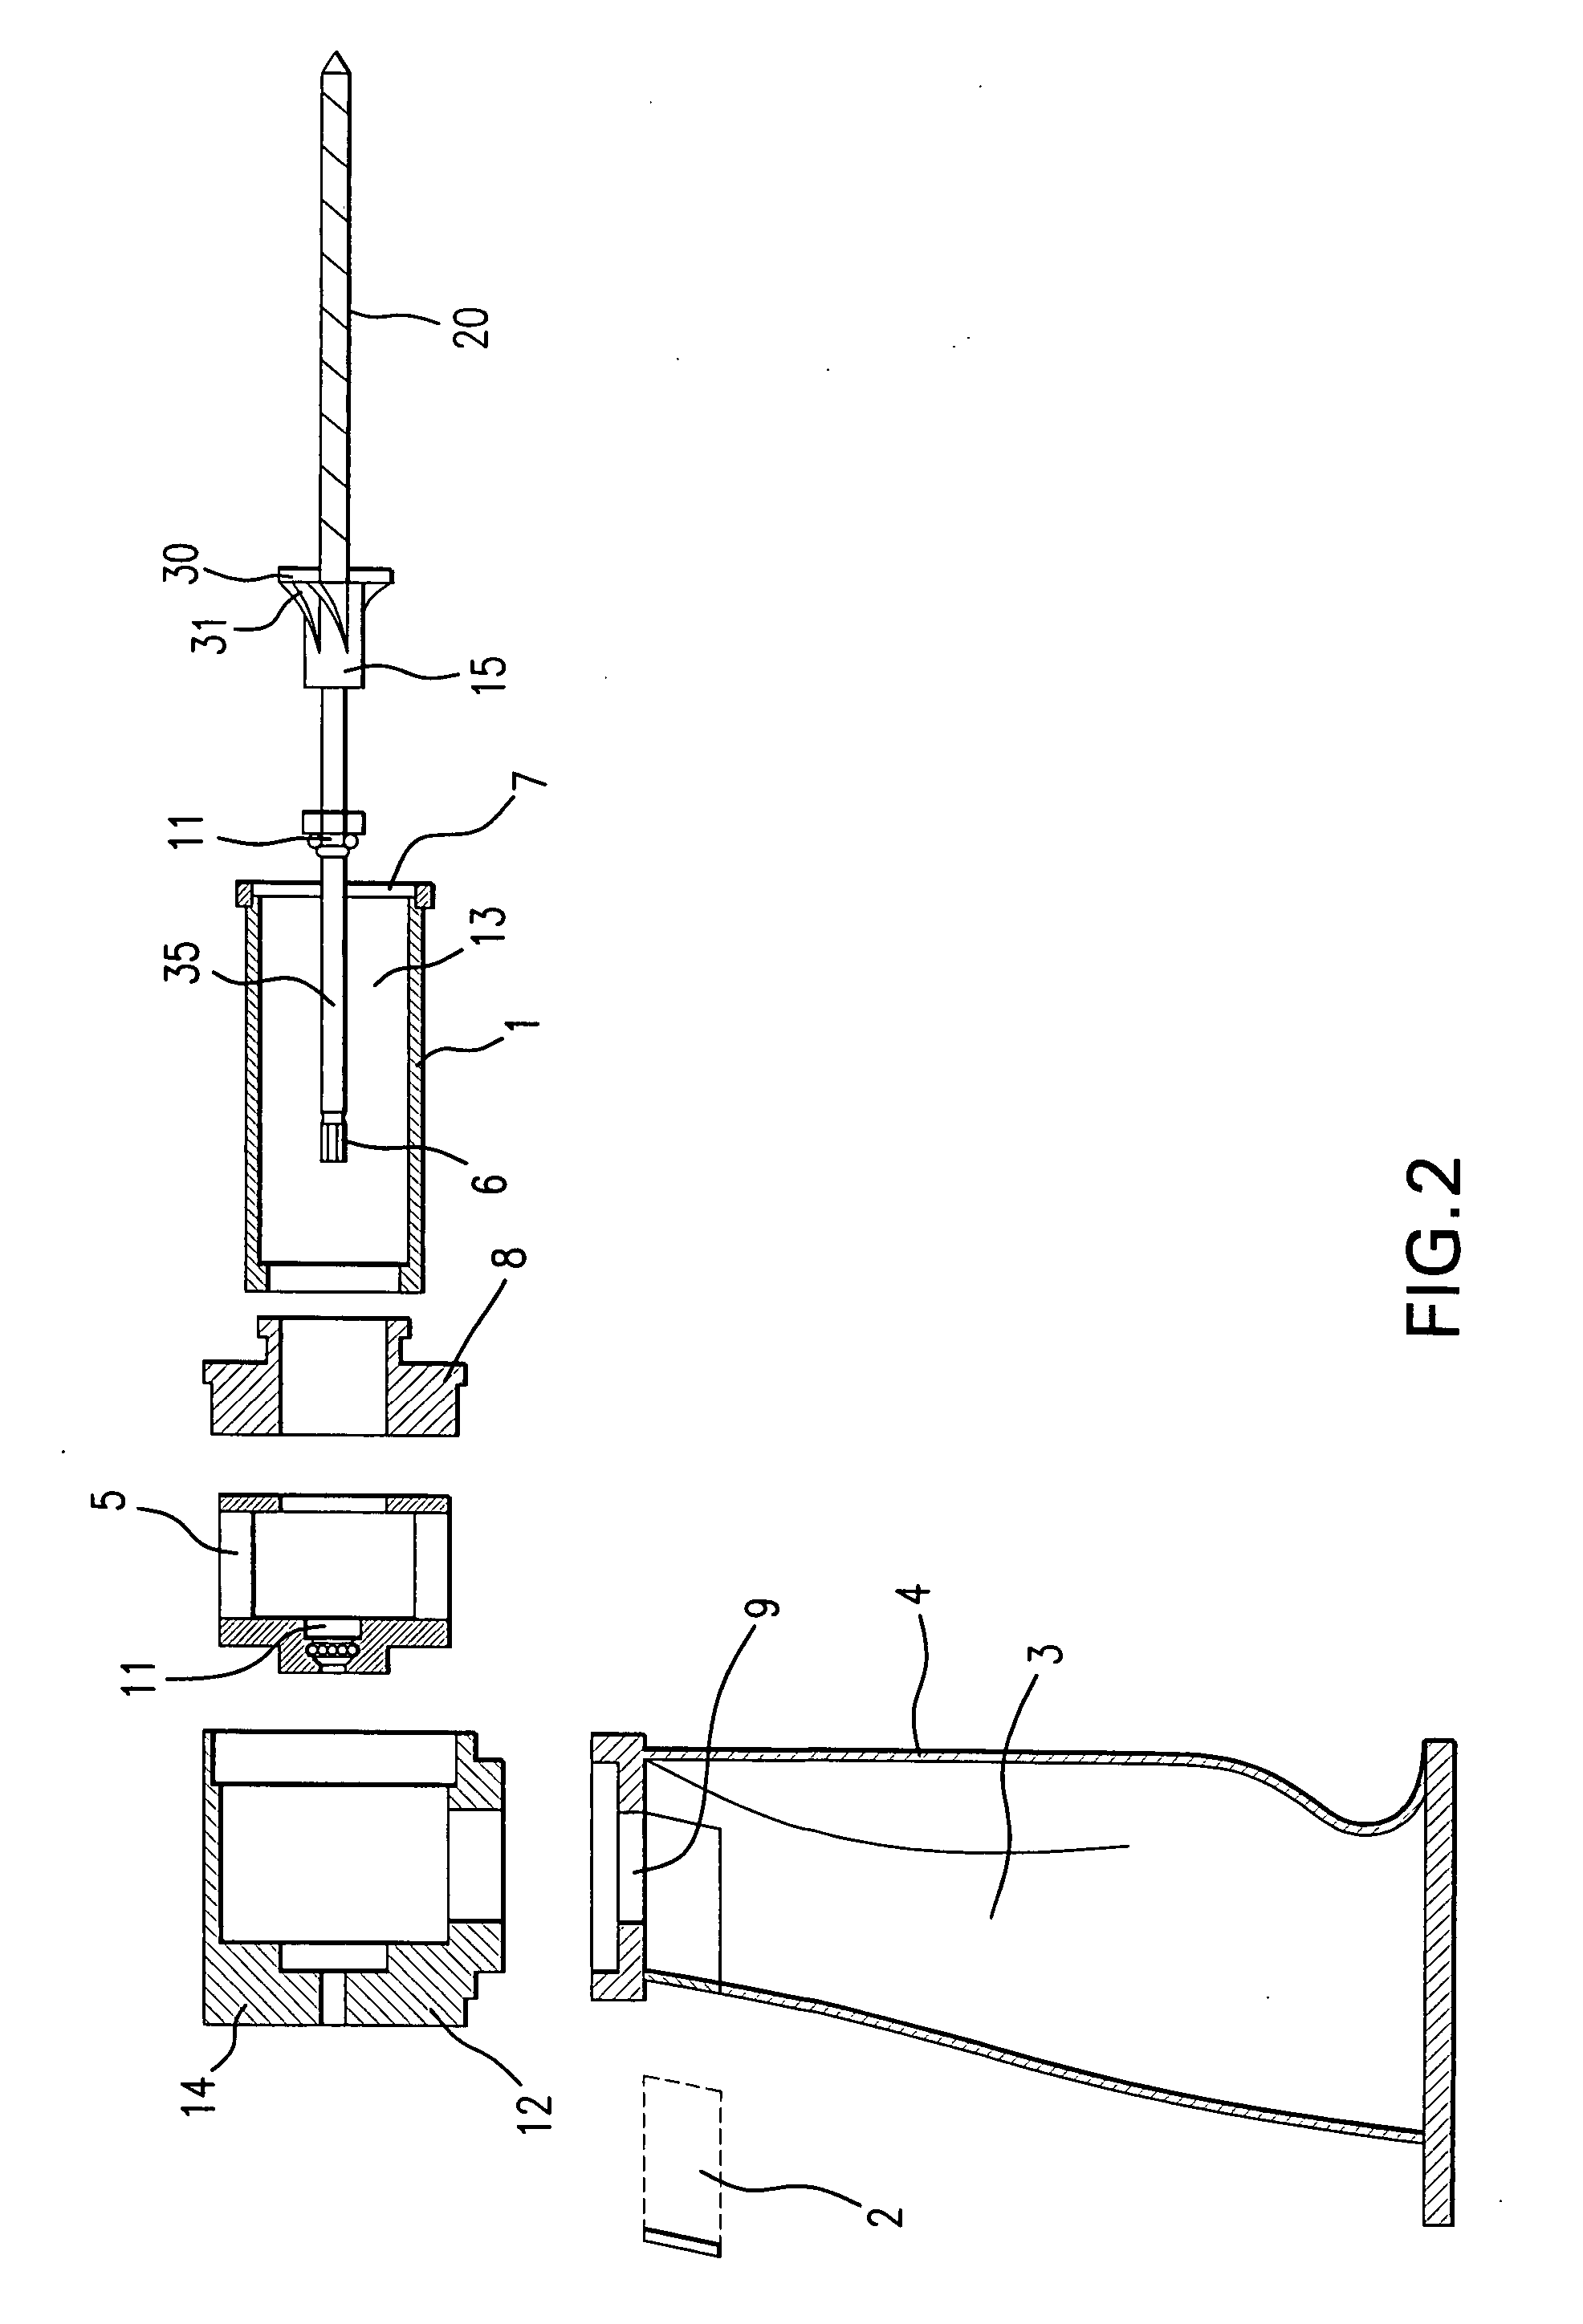 Drill bit and dust collector attachment for drills